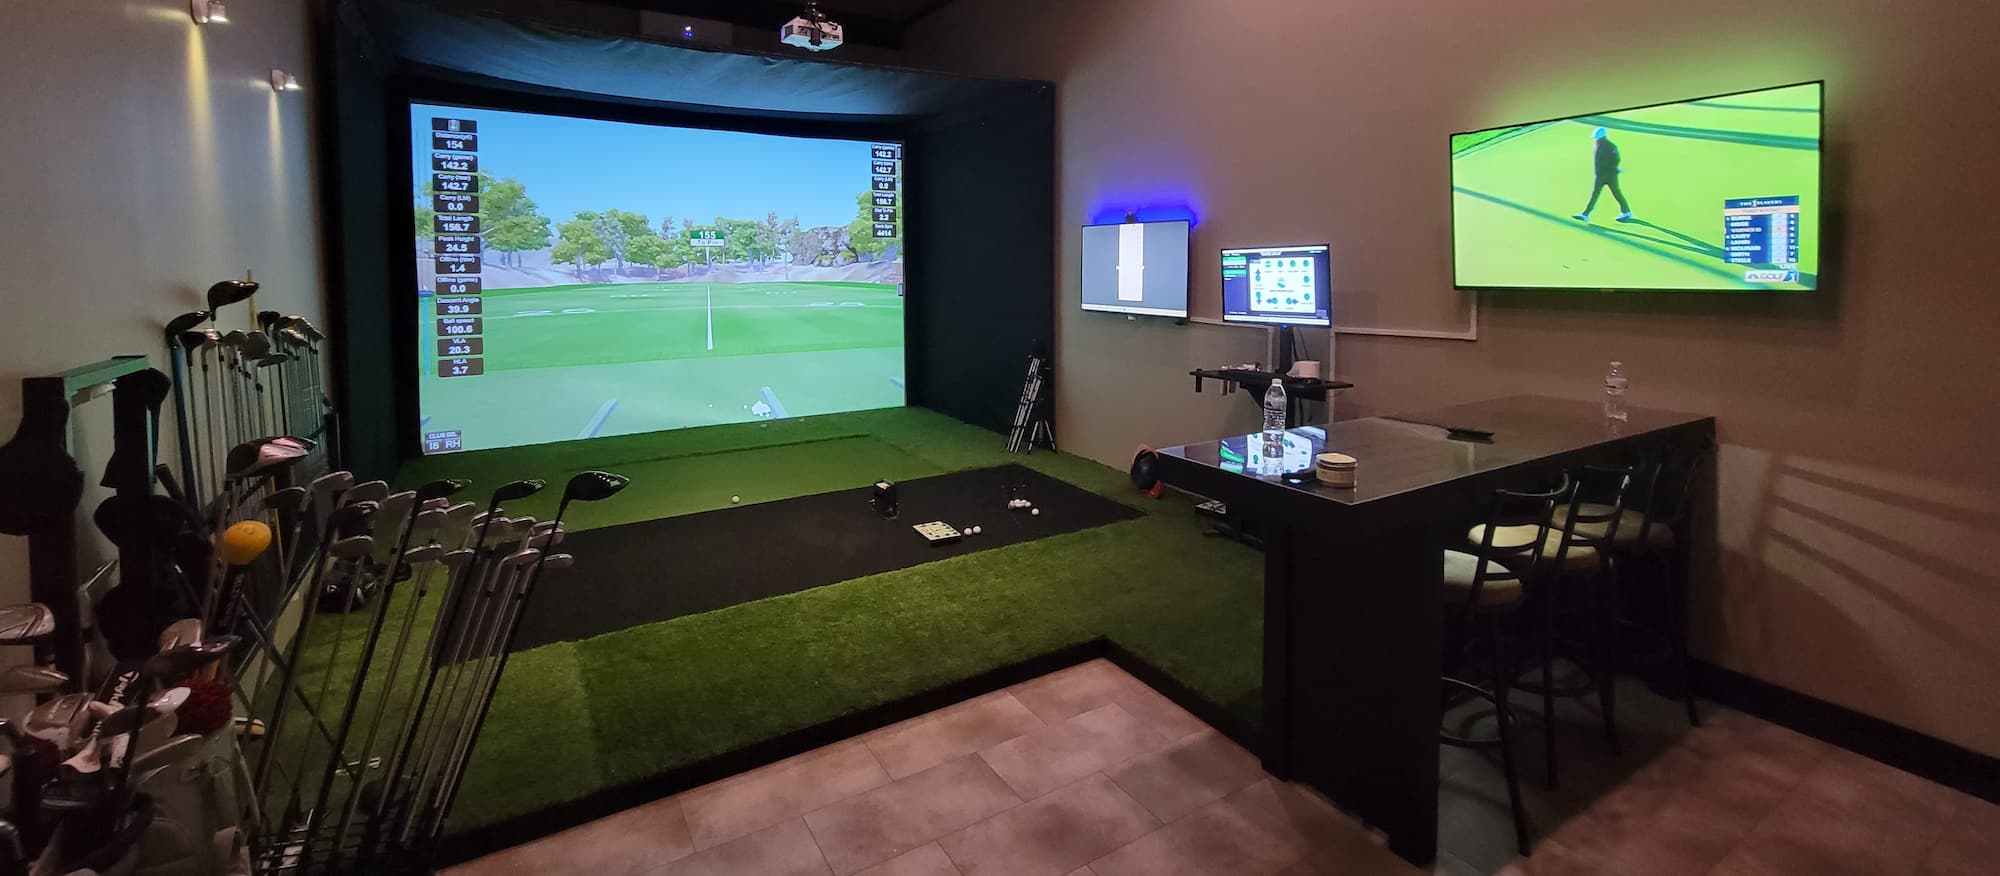 Rain or shine, come practice your swing at the Clubhouse's state-of-the-art golf simulator with stunning reproductions of the world's best courses. Brush up on your putting skills on the new 1,750 sq. ft., 9-hole precision putting green.